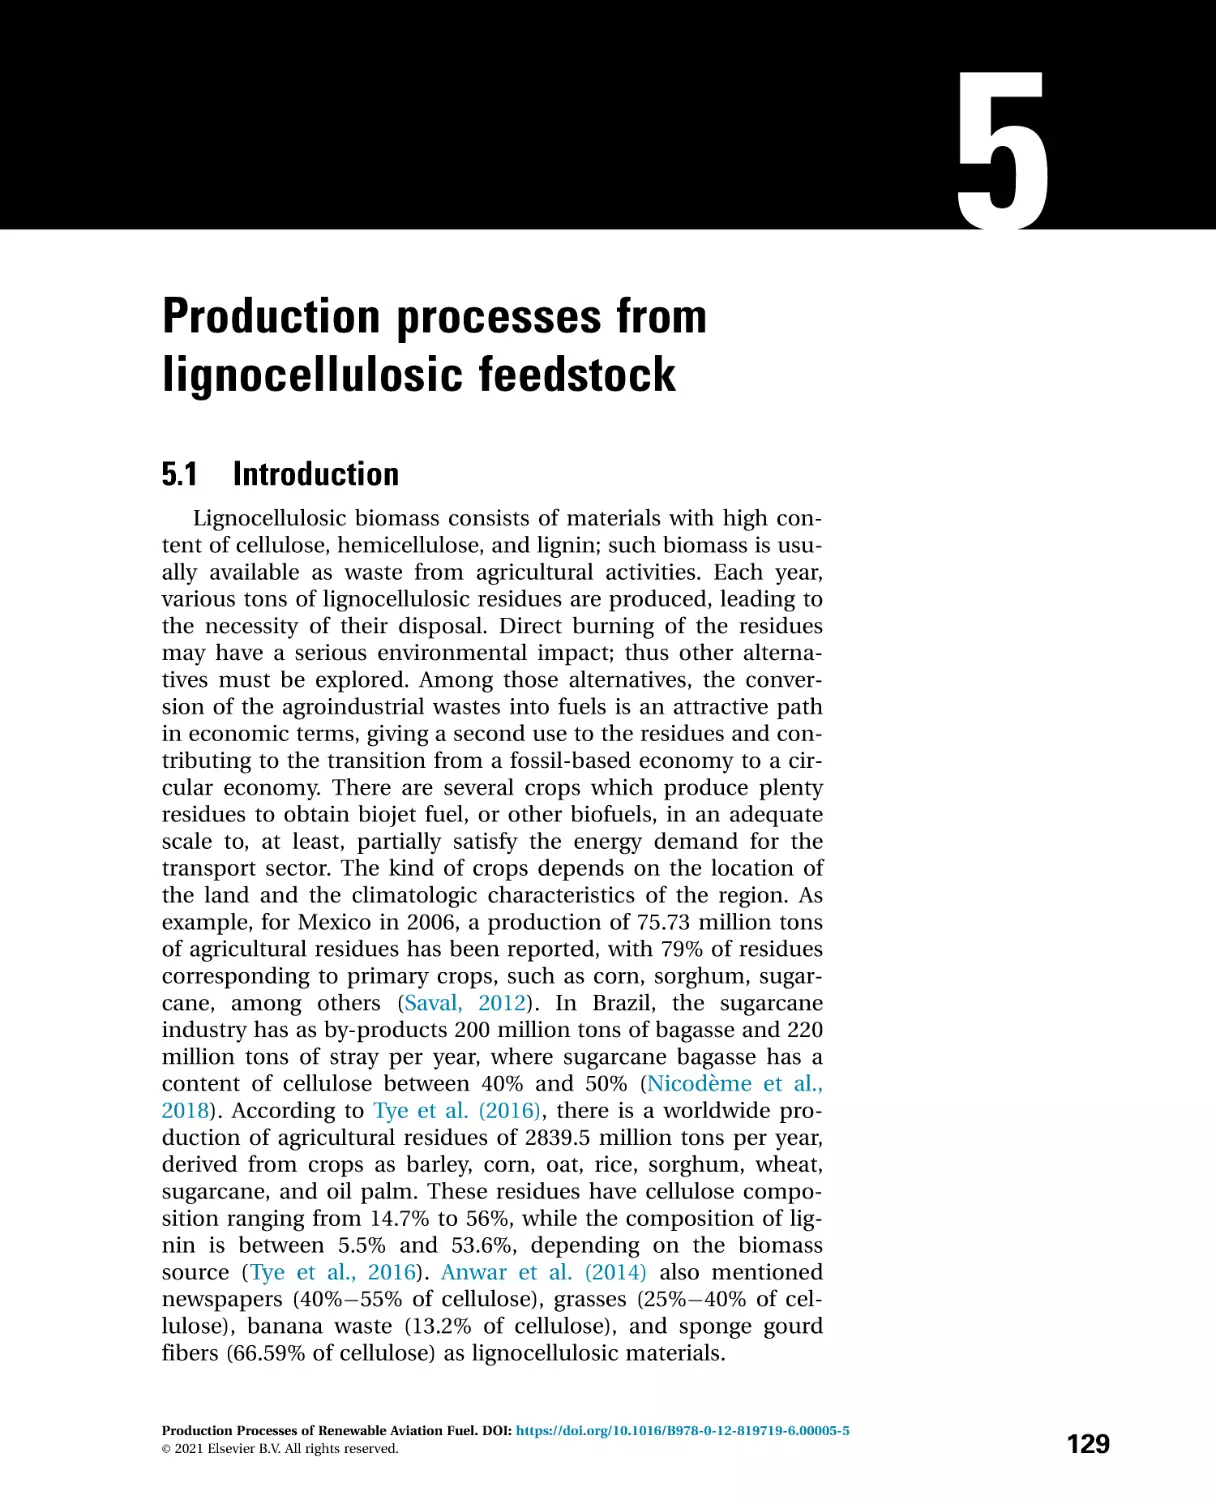 5---Production-processes-from-lignocel_2021_Production-Processes-of-Renewabl
5 Production processes from lignocellulosic feedstock
5.1 Introduction